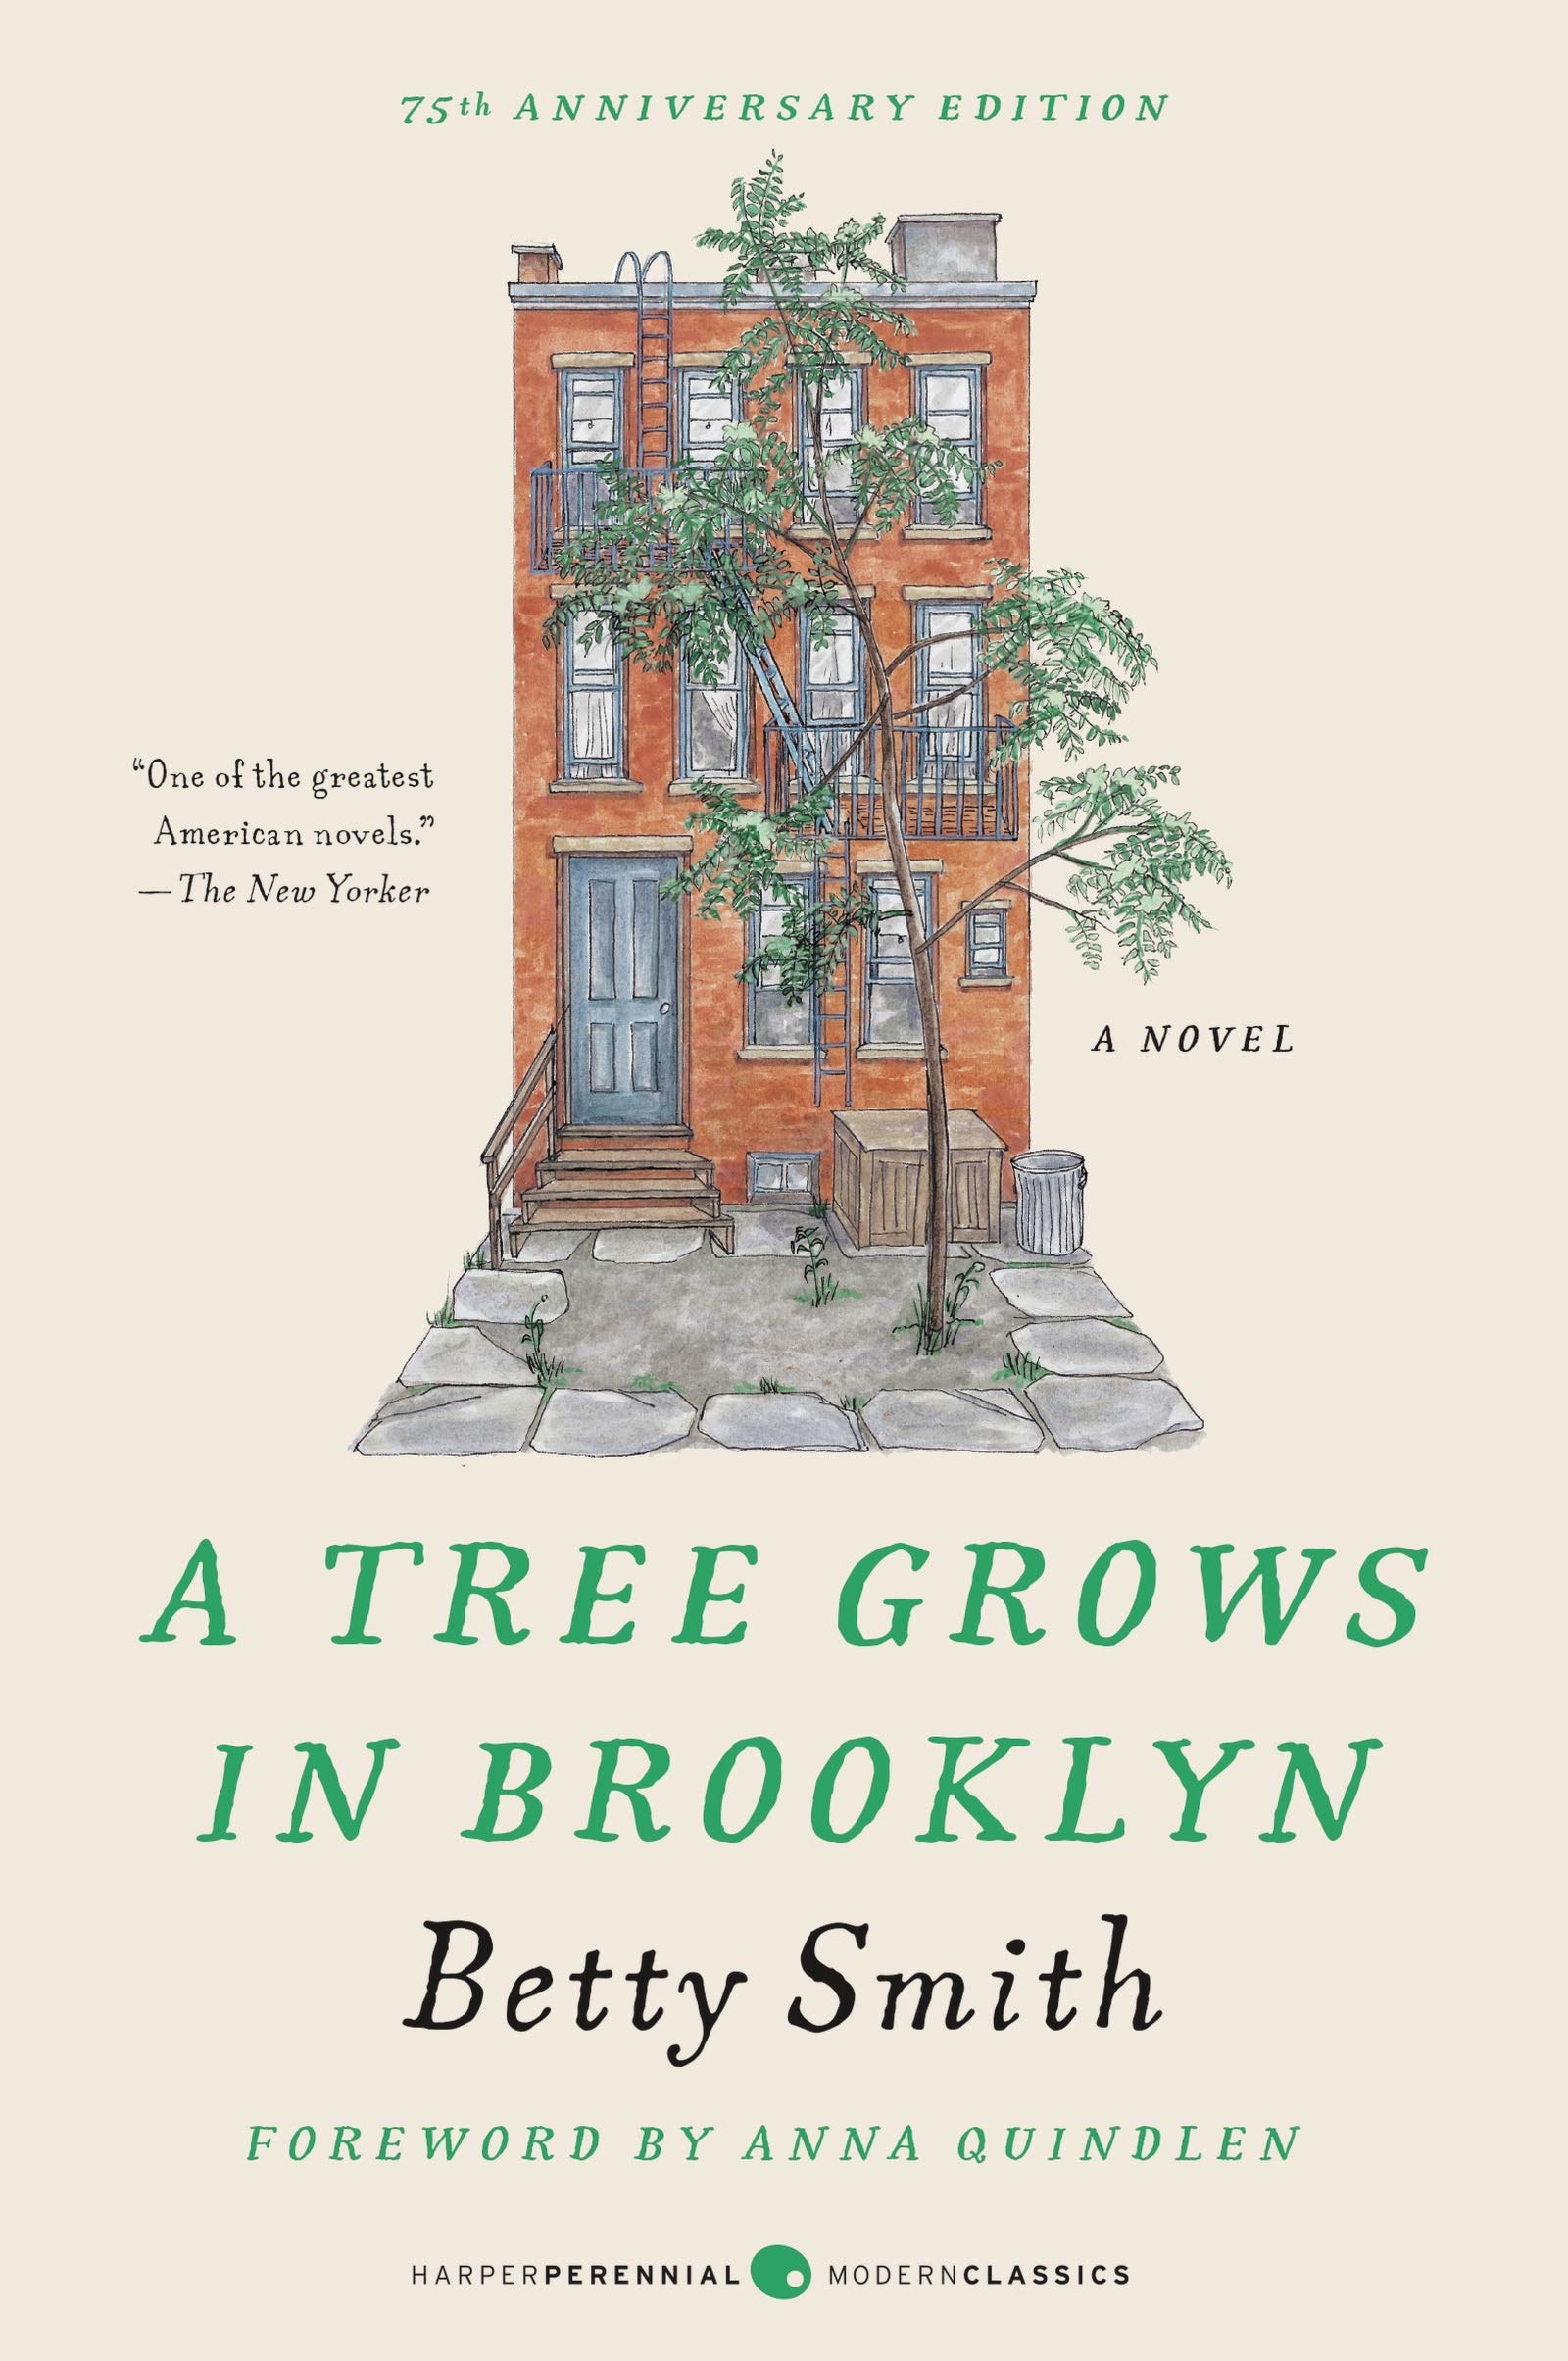 The cover of &quot;A Tree Grows In Brooklyn&quot; by Betty Smith.